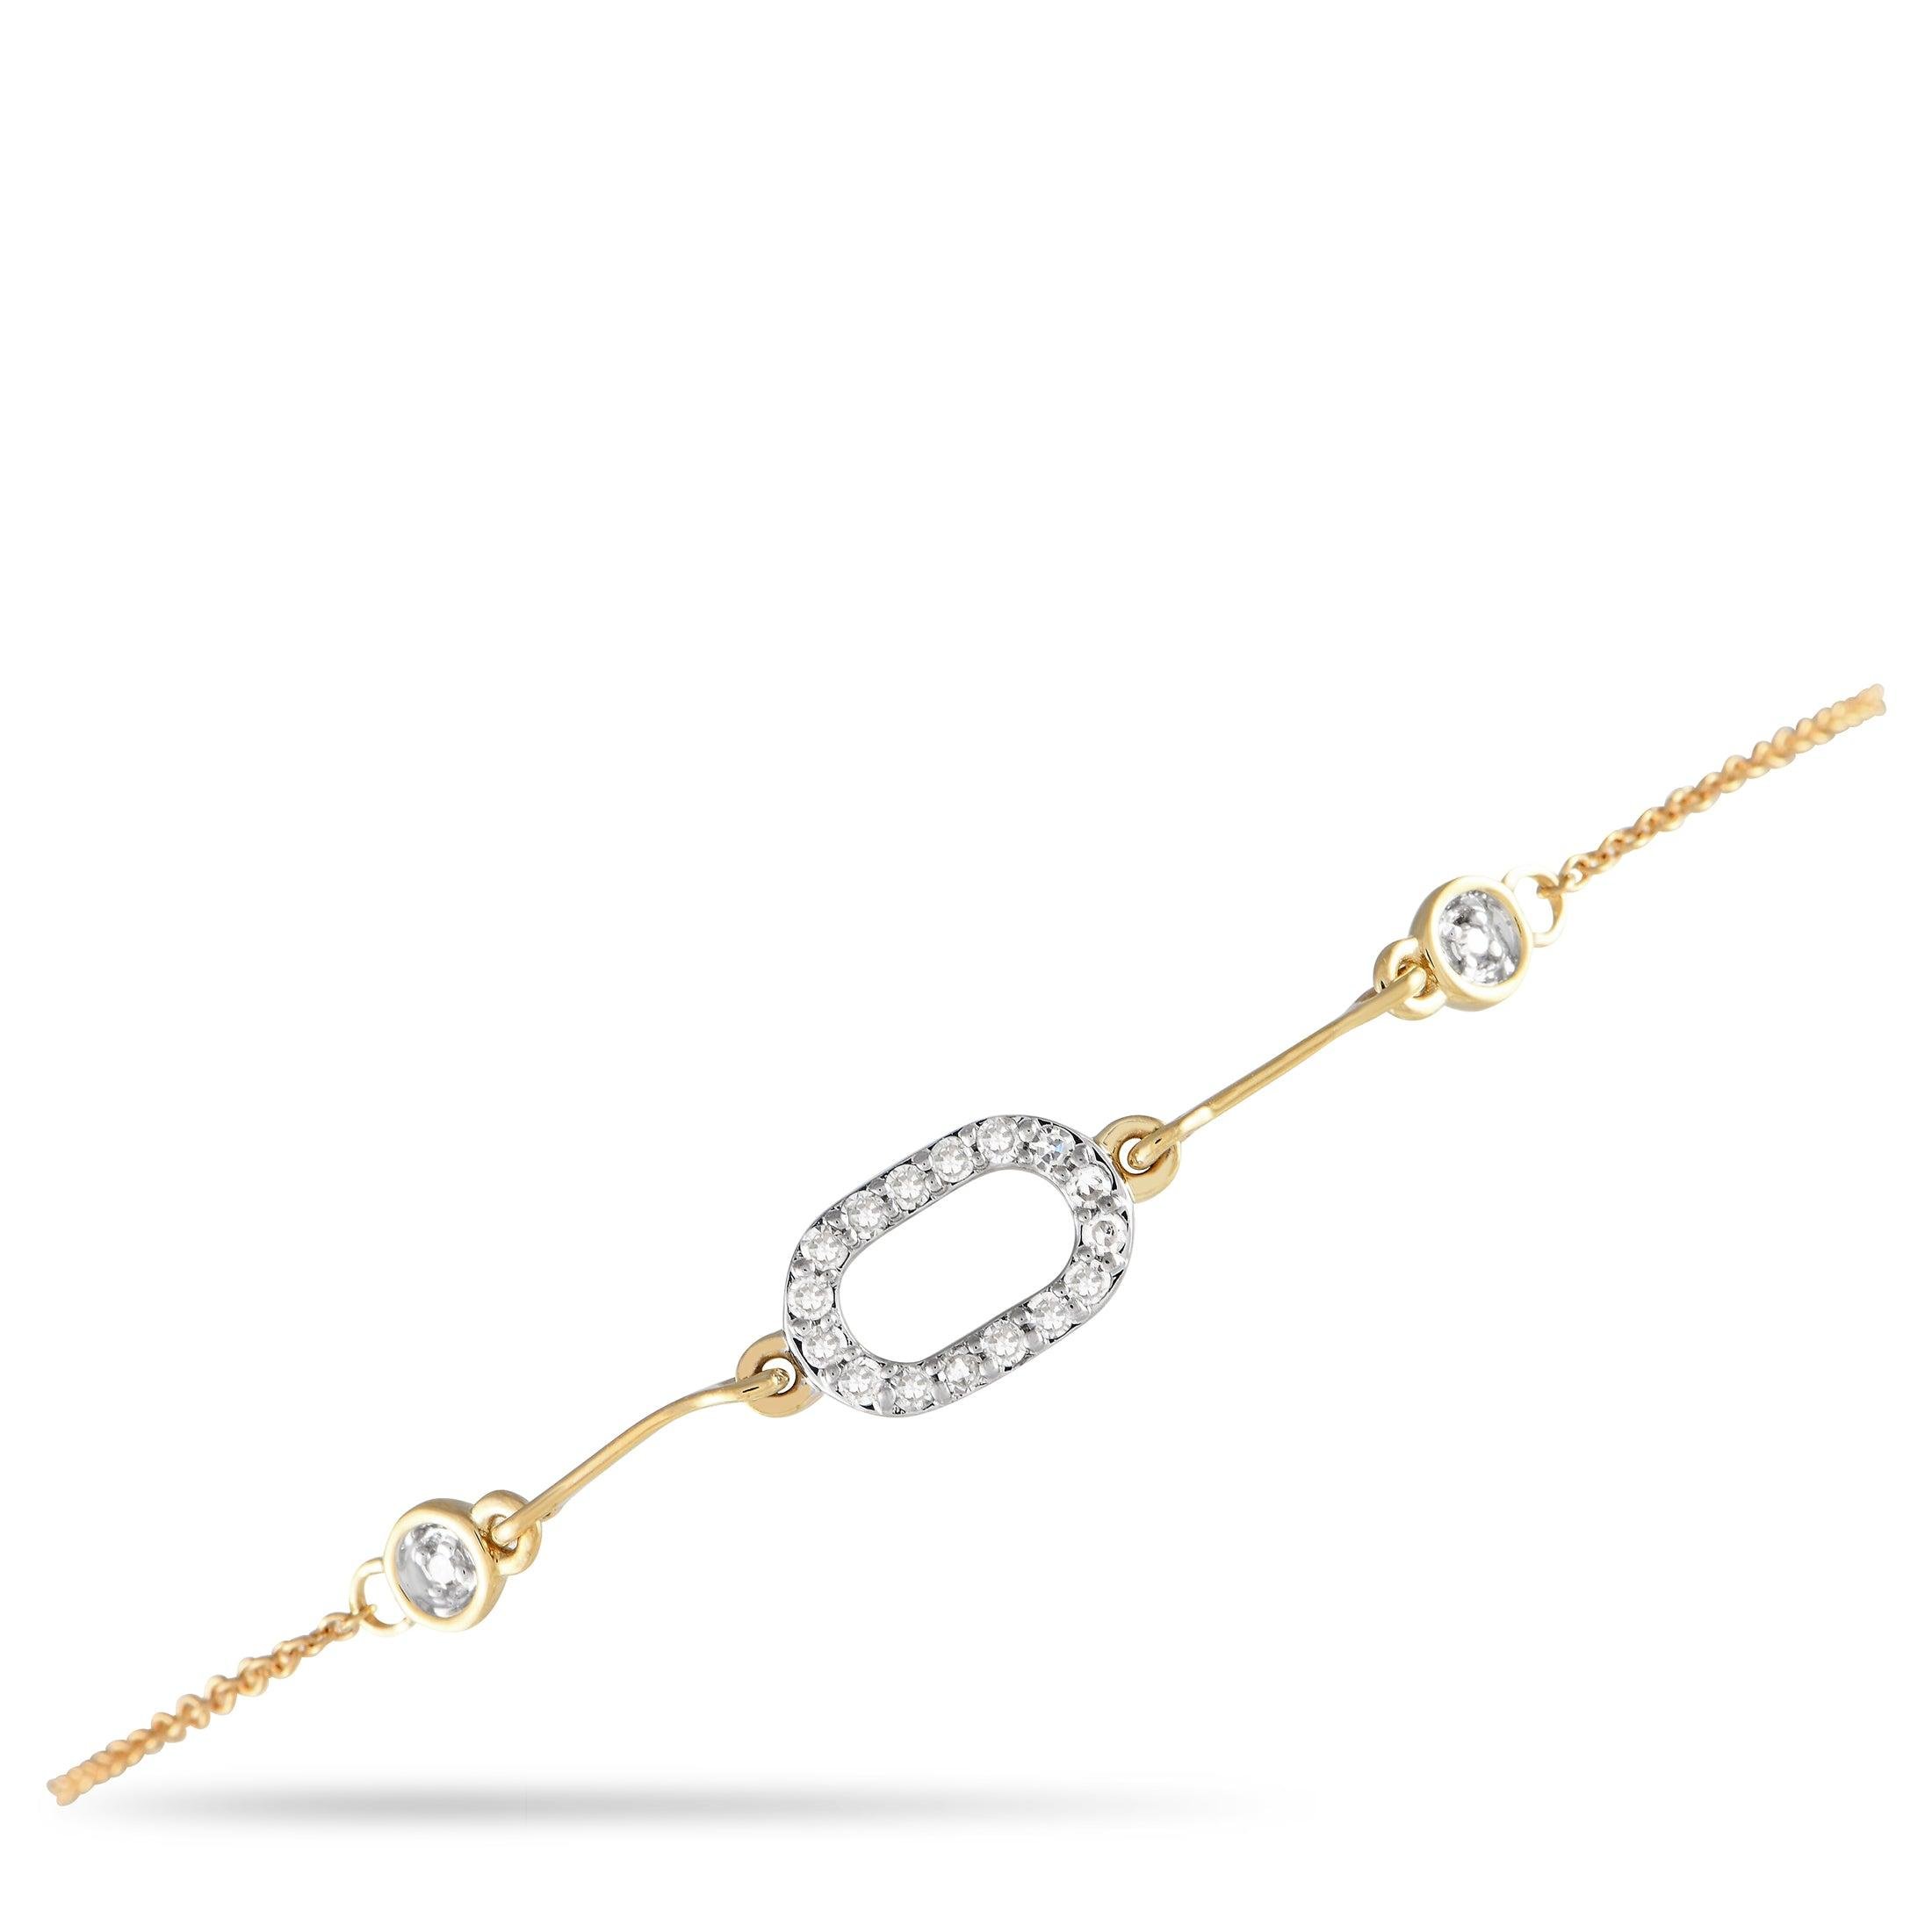 LB Exclusive 14K Yellow Gold 0.10ct Diamond Bracelet BR09661-Y by NON BRANDED